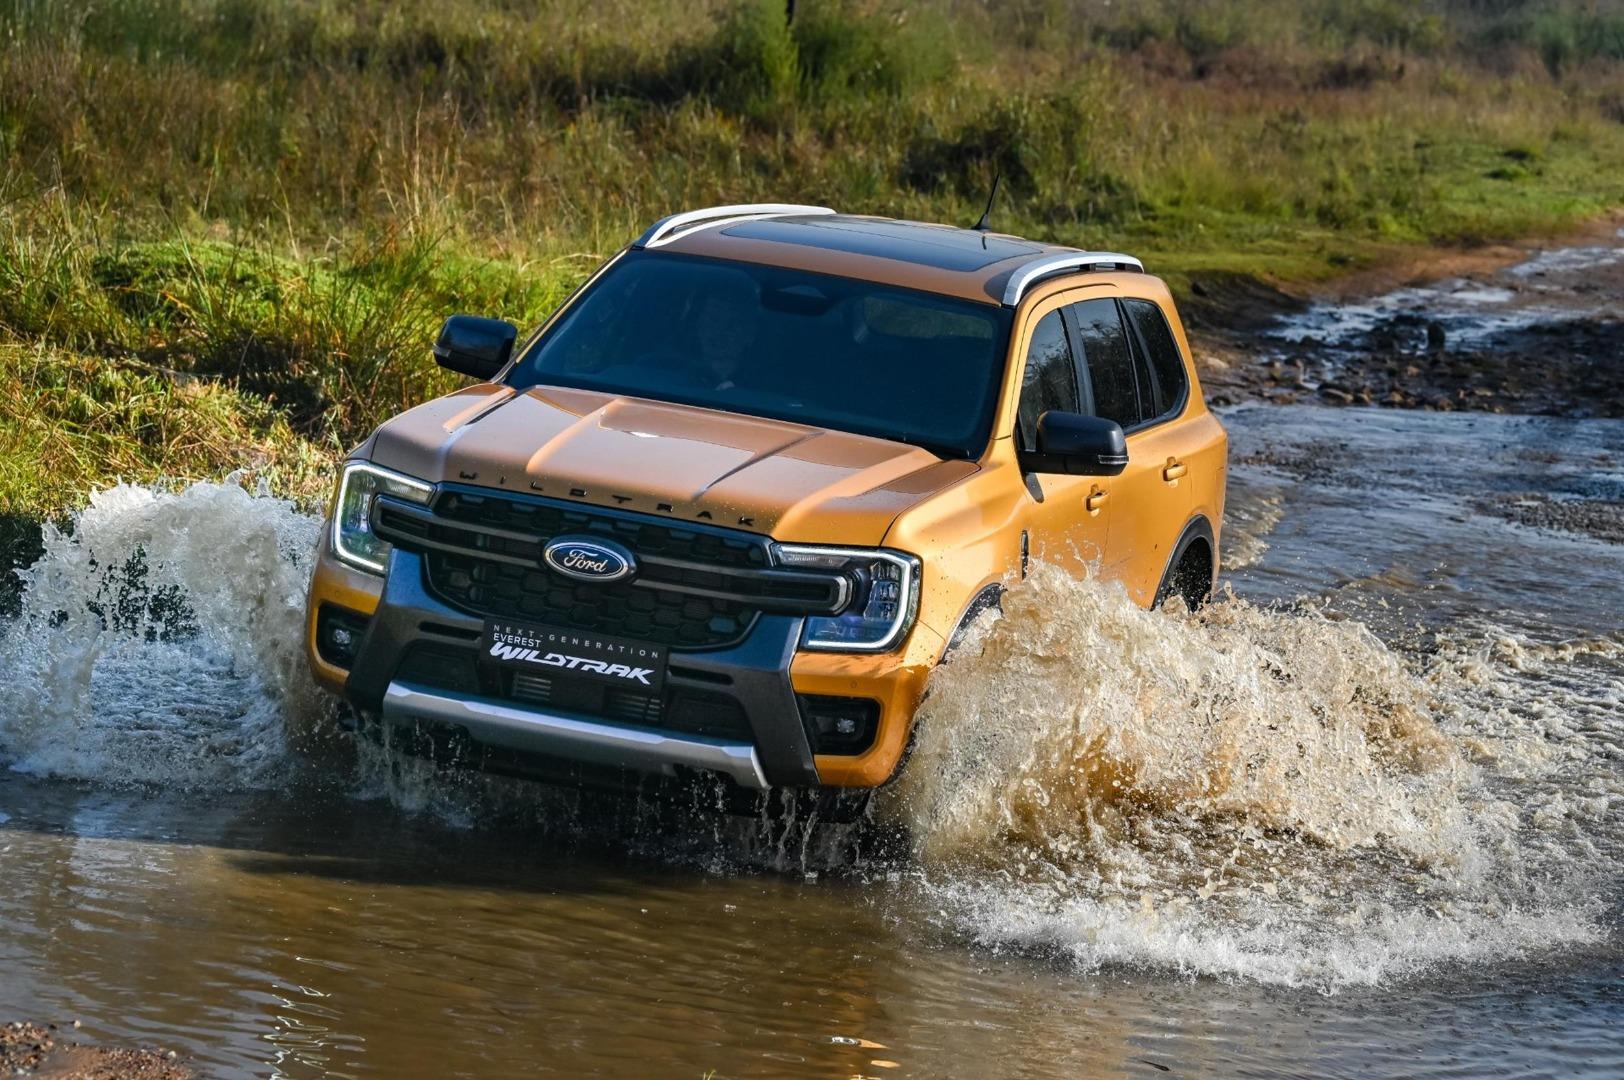 is the ford everest wildtrak good for new drivers?